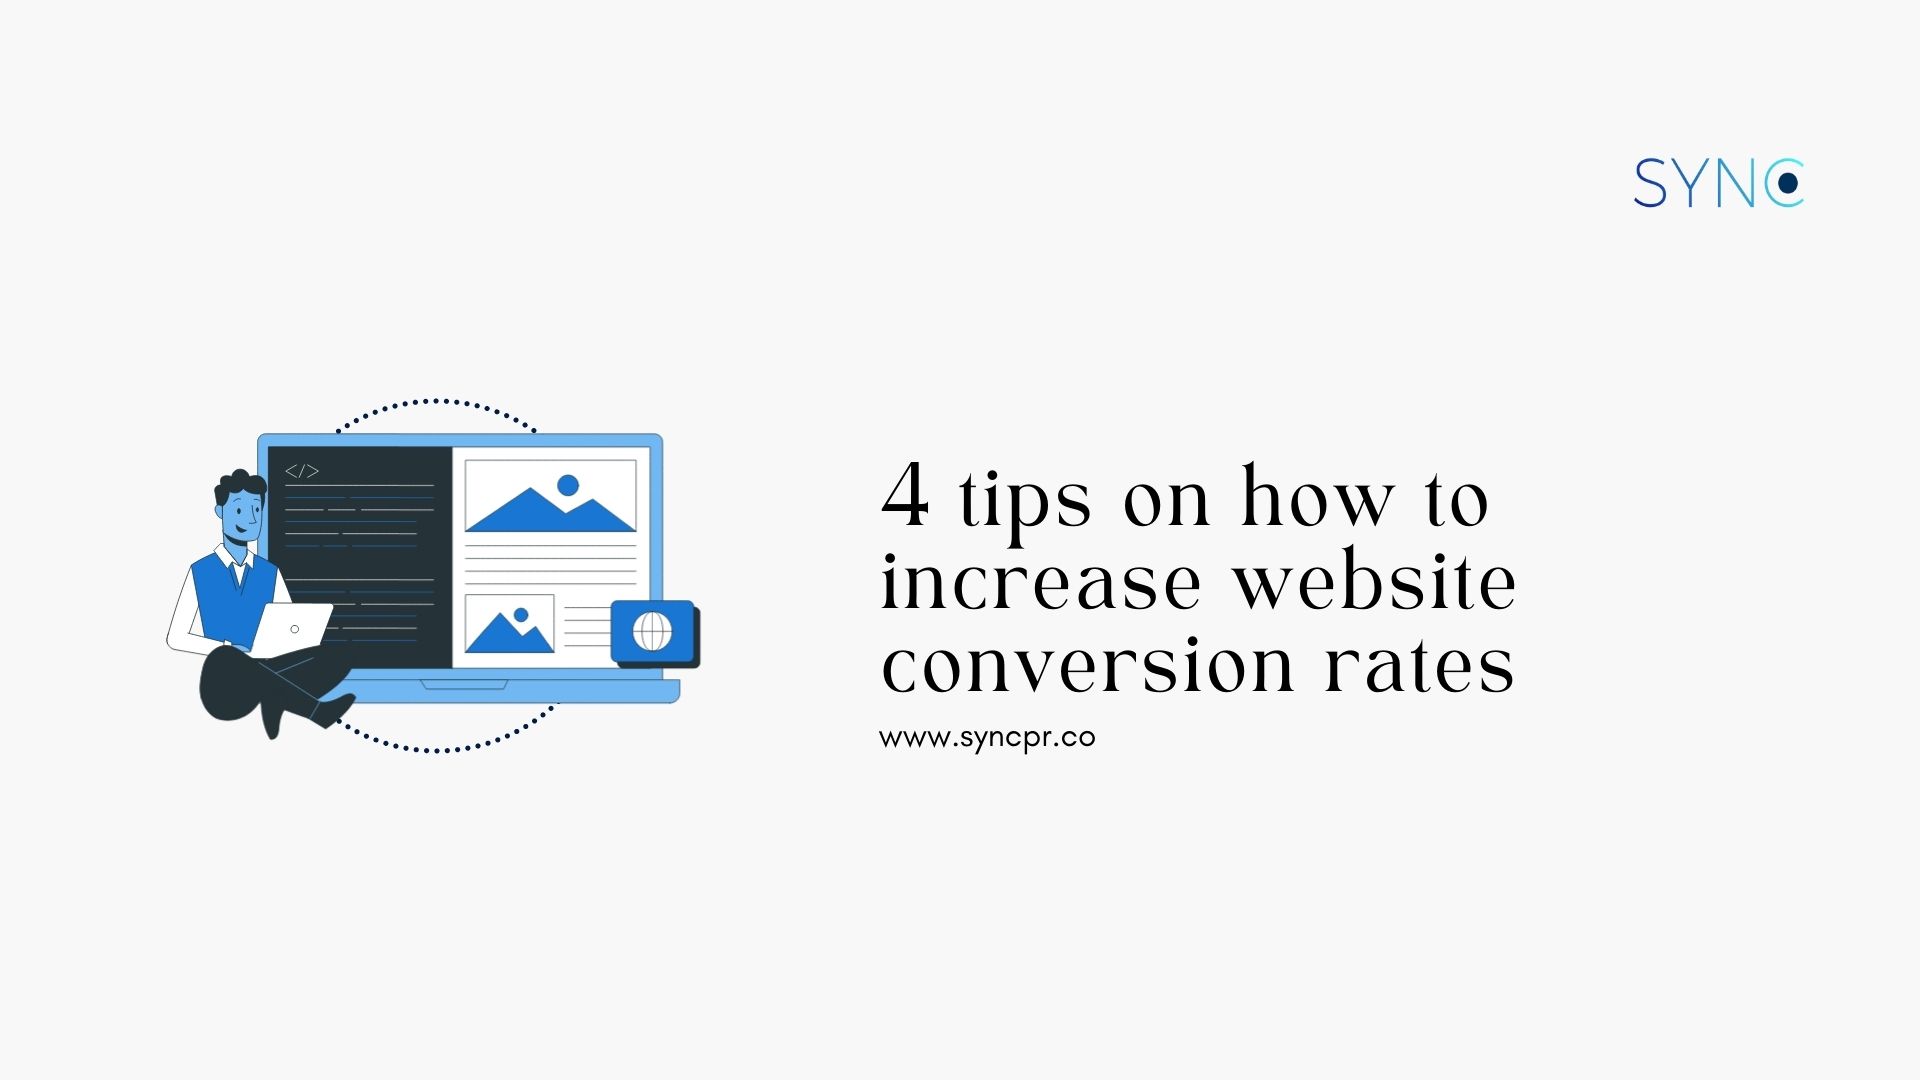 4 tips on how to increase website conversion rates